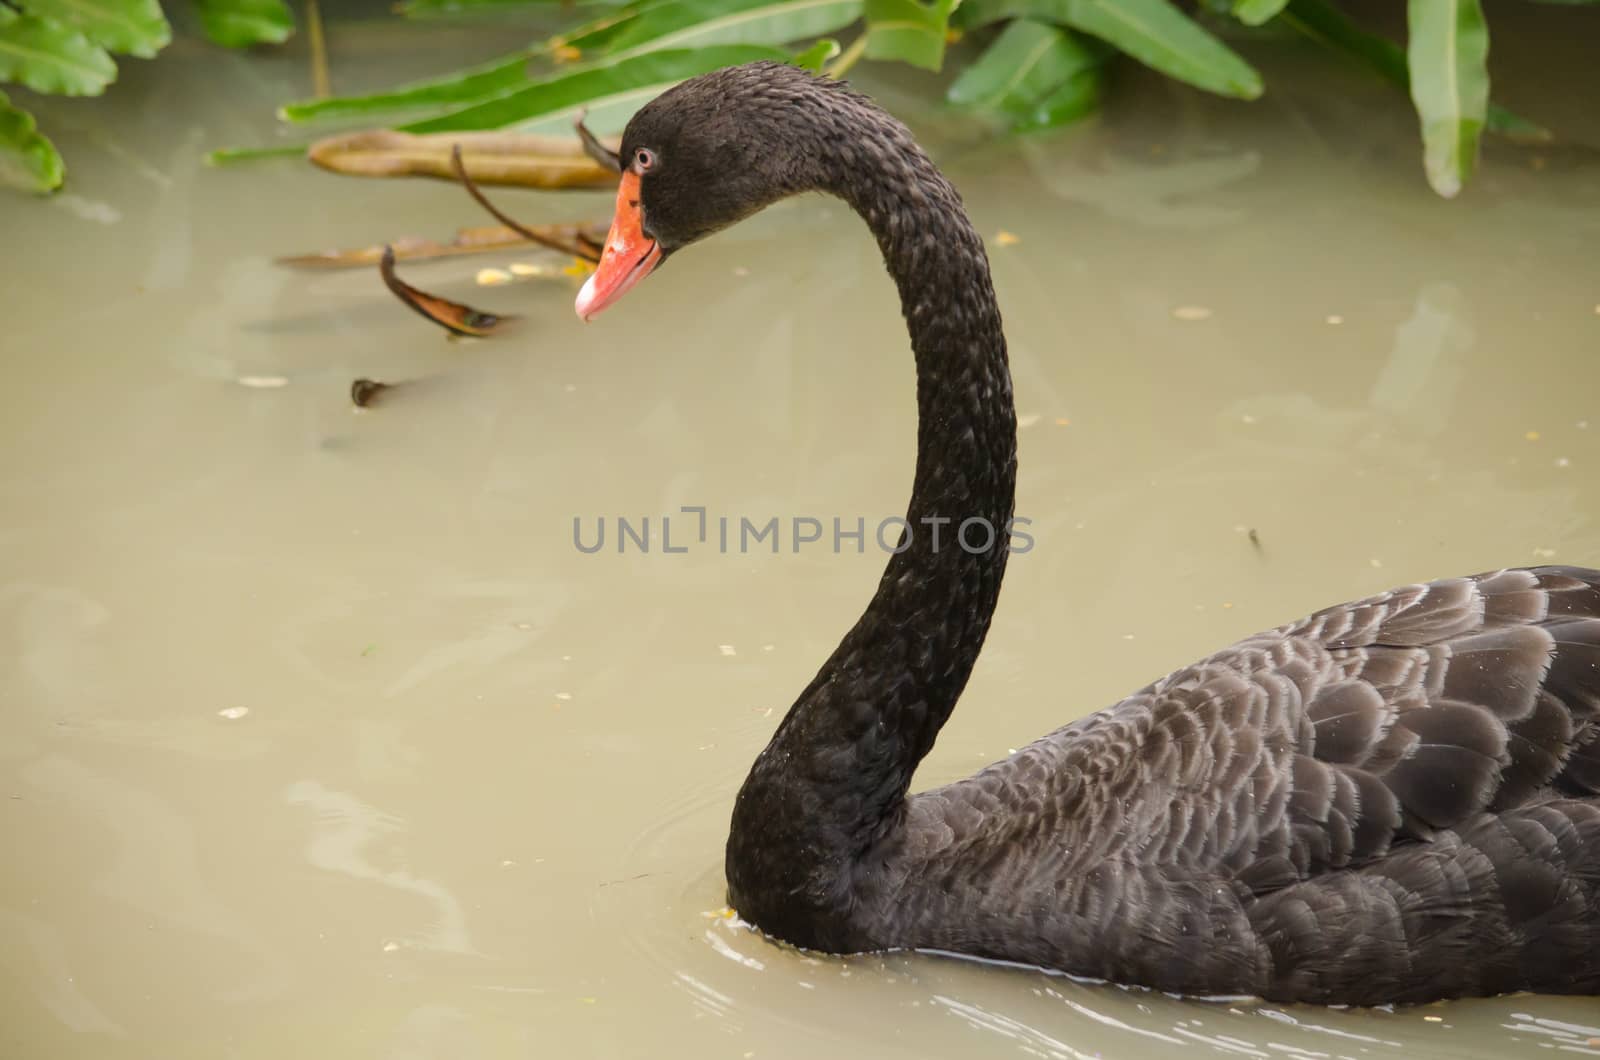 Cygnus atratus is a large waterbird with mostly black plumage and red bills.